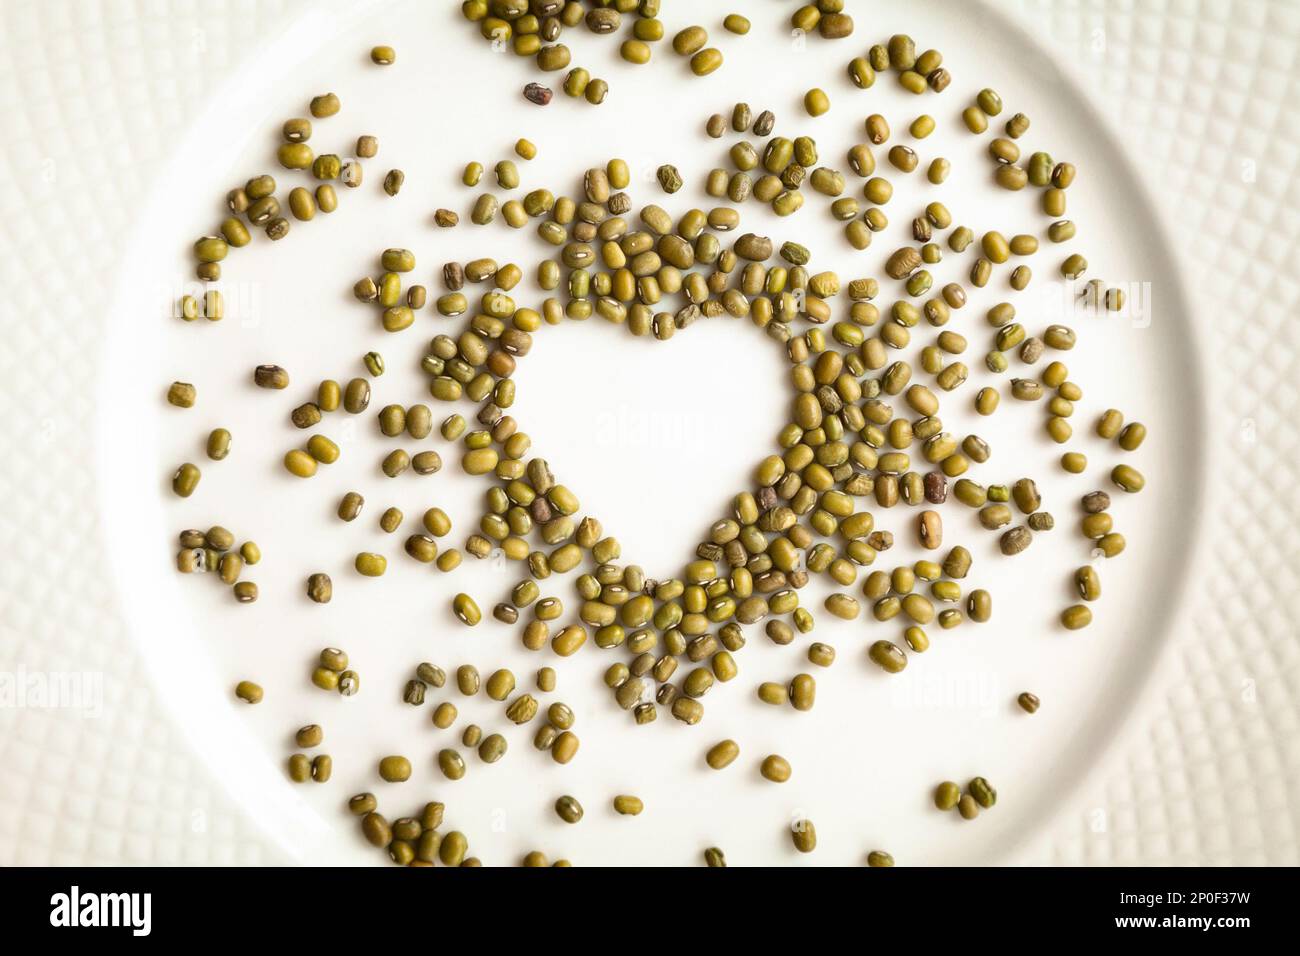 Mung beans in a shape of heart isolated on a white plate. Raw green gram groats food ingredient background. Love for cooking concept Stock Photo